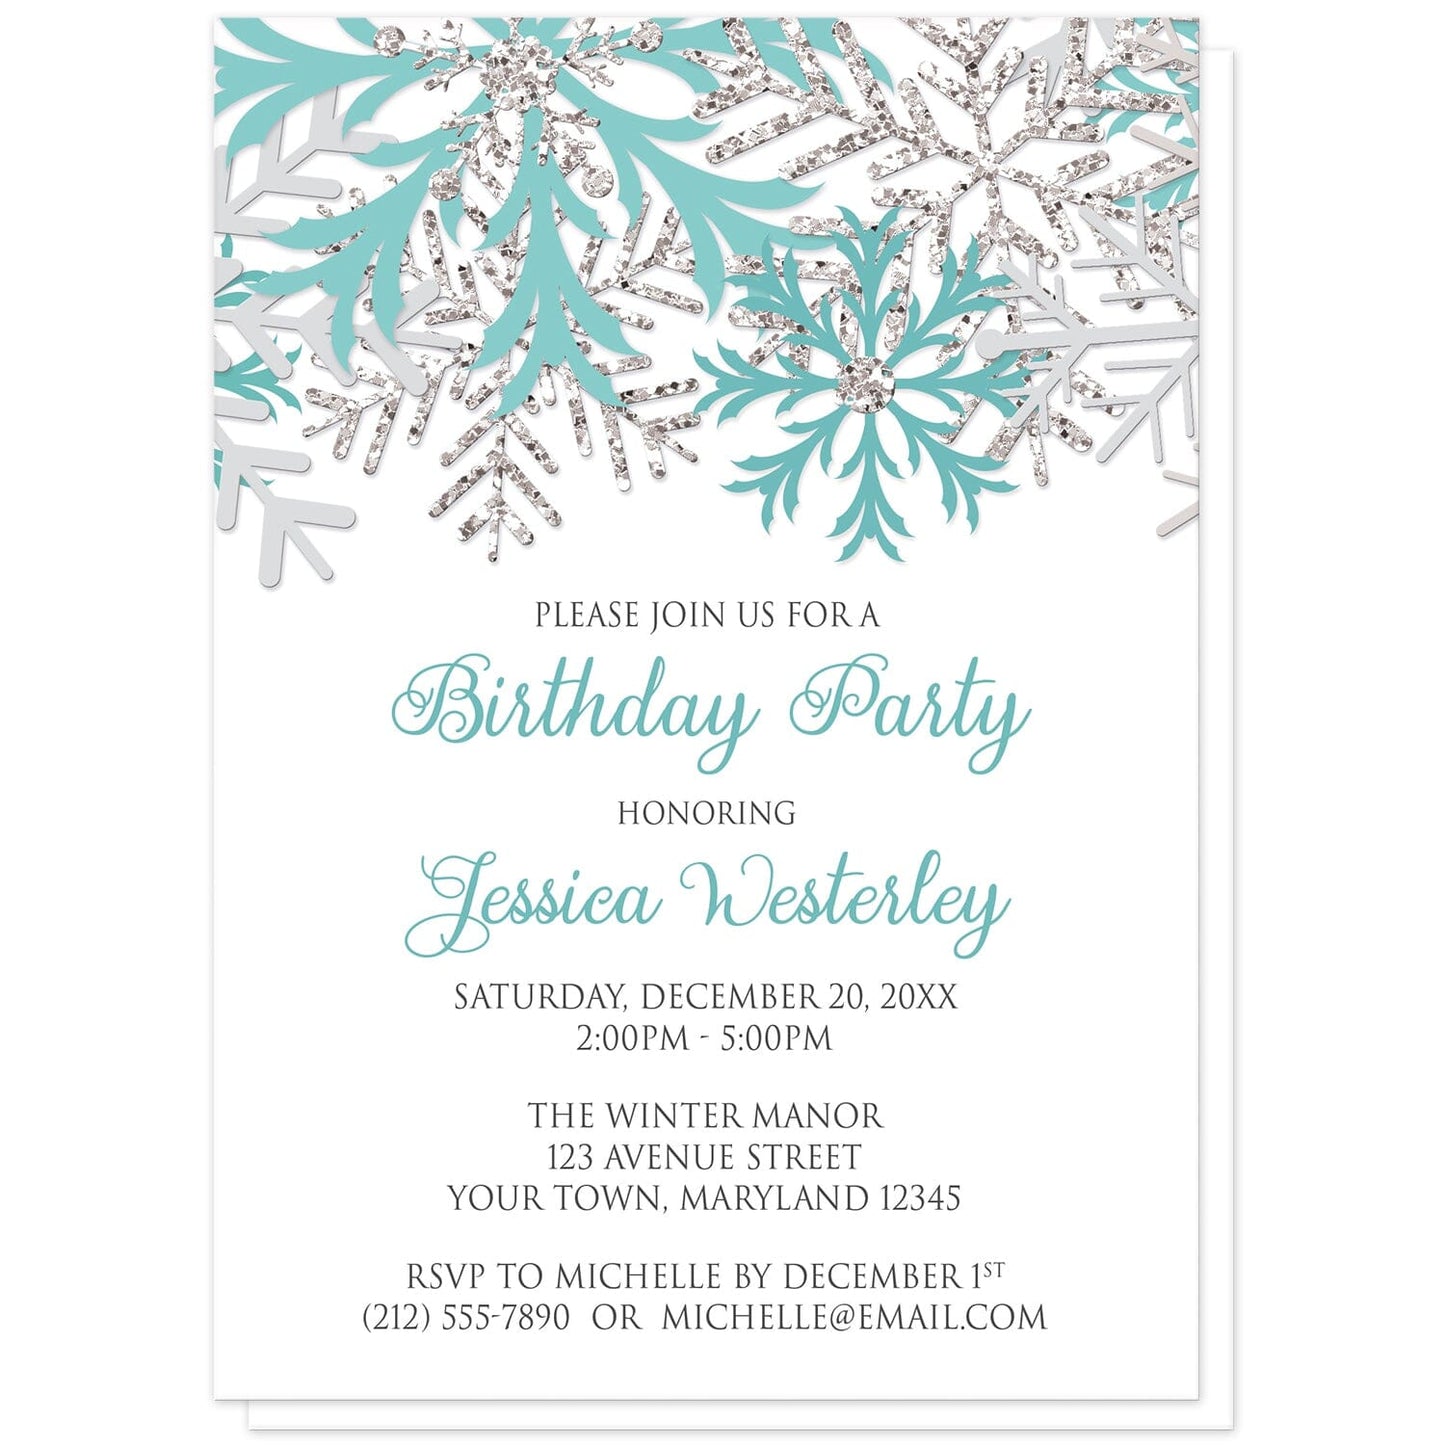 Winter Teal Silver Snowflake Birthday Party Invitations at Artistically Invited. Beautiful winter teal silver snowflake birthday party invitations designed with teal, light teal, silver-colored glitter-illustrated, and light gray snowflakes along the top over a white background. Your personalized birthday celebration details are custom printed in teal and gray below the pretty snowflakes.